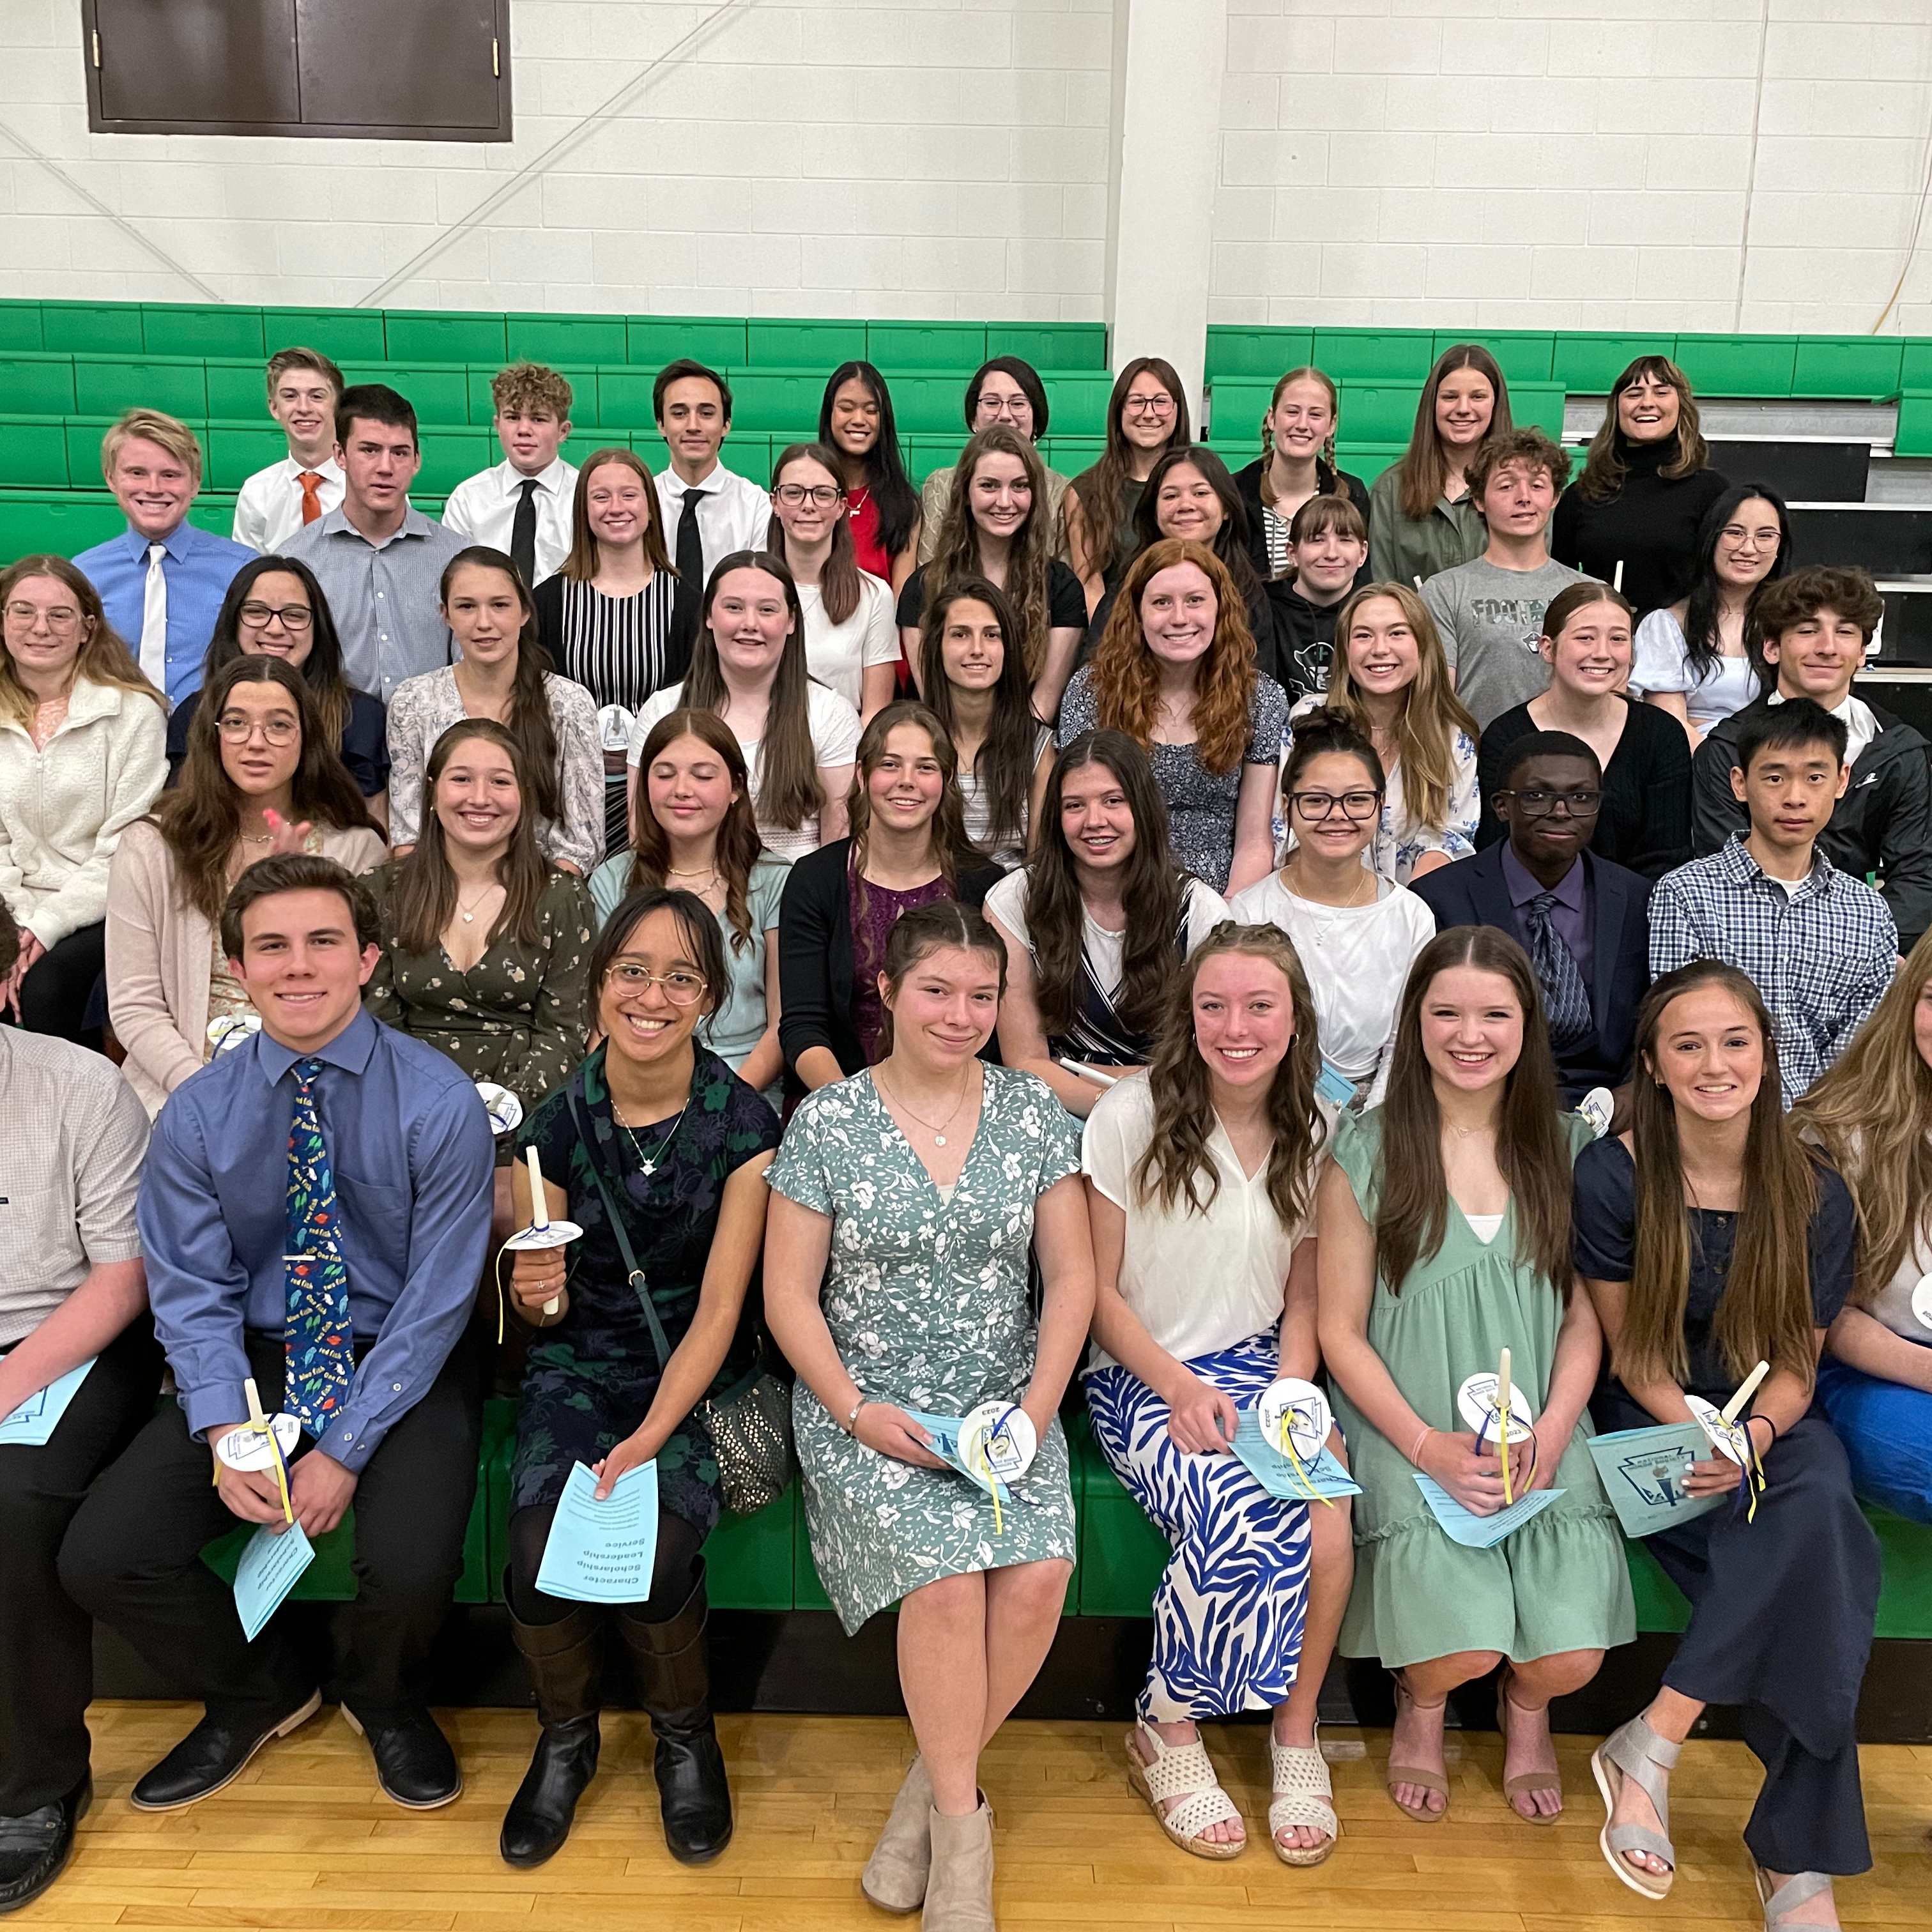 St. Mary's High School National Honor Society NHS Induction